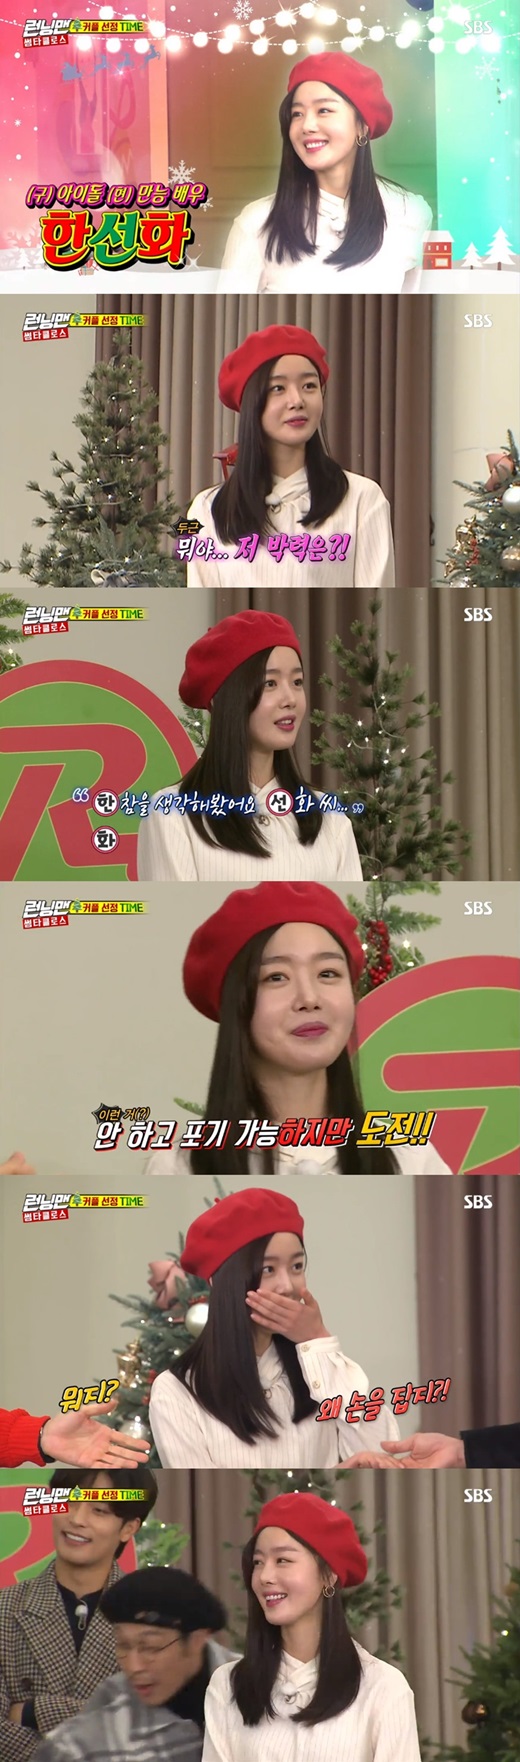 <p>The last 23 days broadcast SBS TV ‘Running Man’Christmas anniversary ‘thumb Satan Claus’ special unfolds, Han Sunhwa as a guest starring.</p><p>Han Sunhwa is a couple chases this as much as even peek-a-Boo bear went. Among these Lee Kwang-soo and a couple were, but eventually the night or back to even peek-a-Boo to my Princess and first appeared from the chaos that engulfed in.</p><p>Han Sunhwa is a mint one with open as a partner, Lee Kwang-soo, a taxi to the guest, but with divergence time got. The sudden situation was, but Lee Kwang-soo of the mind to hold on to the ‘Lee Kwang-soo’ name Samshan challenge. Confidence Samshan, this was Han Sunhwa is the last letter in beep clean and MC Yoo Jae-Suk to shoot archery or just take a laugh.</p><p>Therefore, the Solo became Han Sunhwa is again paired Peek-A-Boo bear went, remaining a partner of Yoo Jae-Suk chose his party for the Samshan, and a new crush Peek-A-Boo to ask wits to exert for men the other for toys and showed them.</p><p>So long time art appeared in the beginning a strong impact to the left Han Sunhwa next week in earnest and unfolds in the couples race on any active show but there are many expectations.</p><p>Meanwhile, Han Sunhwa is coming 29, 12 at night, to be broadcast in tvN short drama ‘drama stage 2019 - Good - by my life insurance’ - find out.</p>